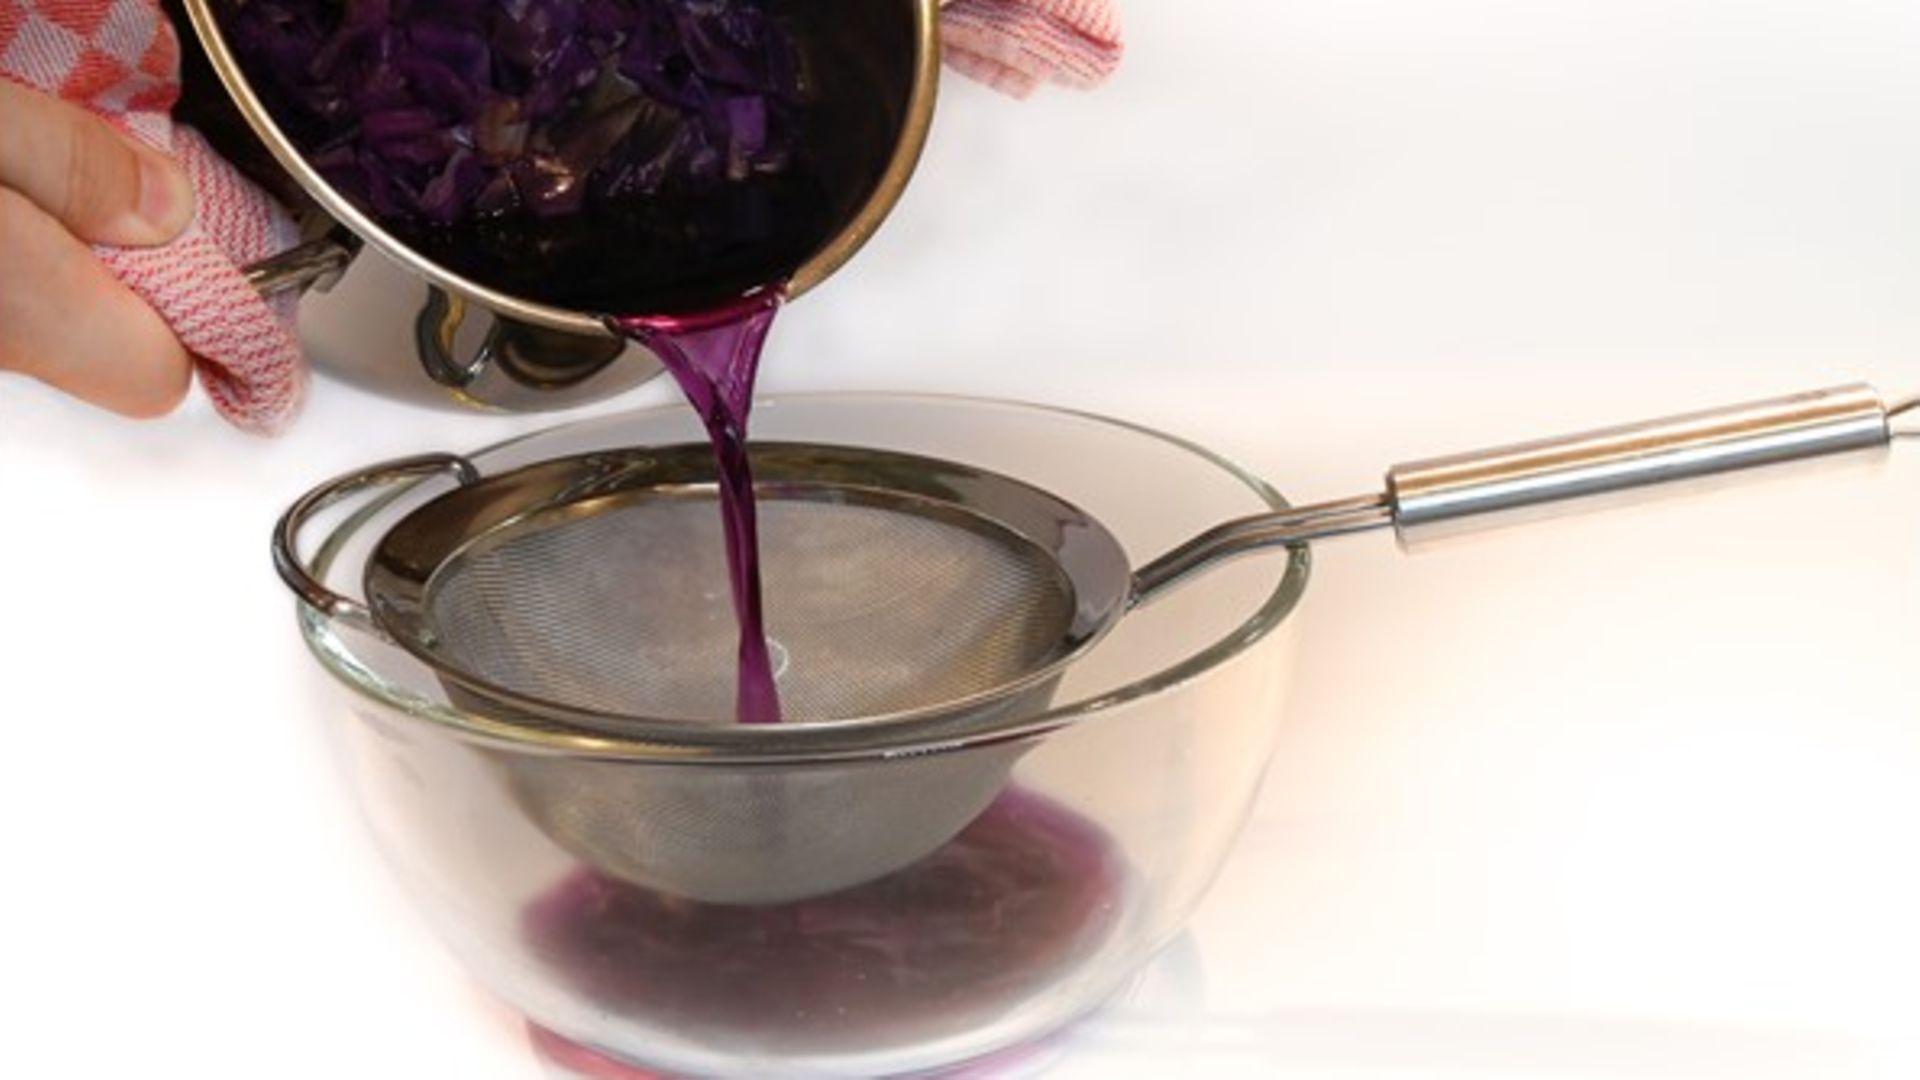 red cabbage juice is poured through sieve